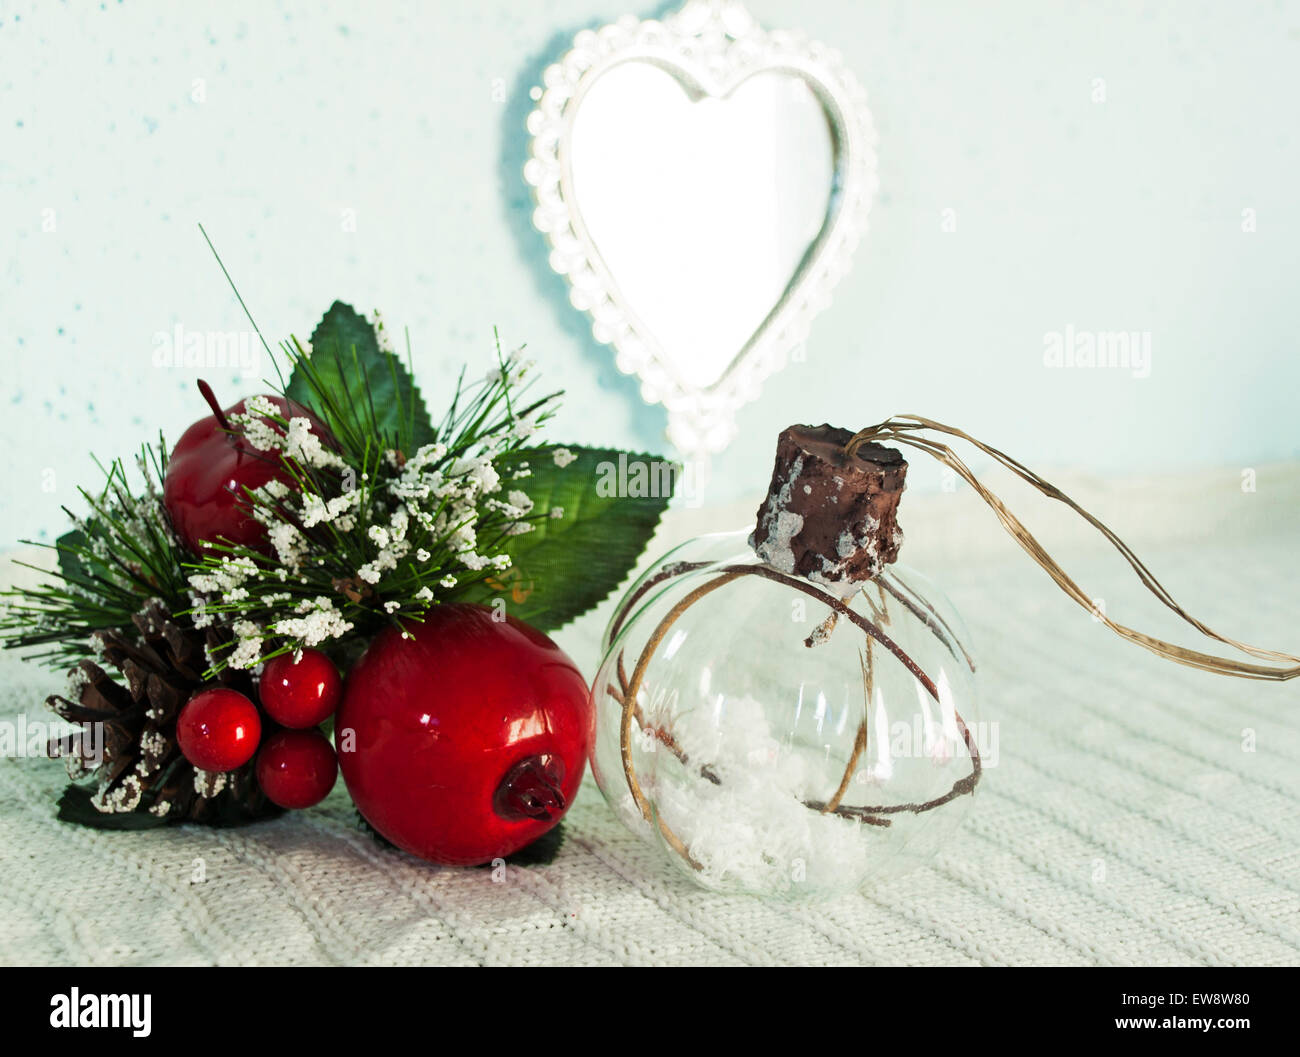 Christmas decoration with red apples Stock Photo